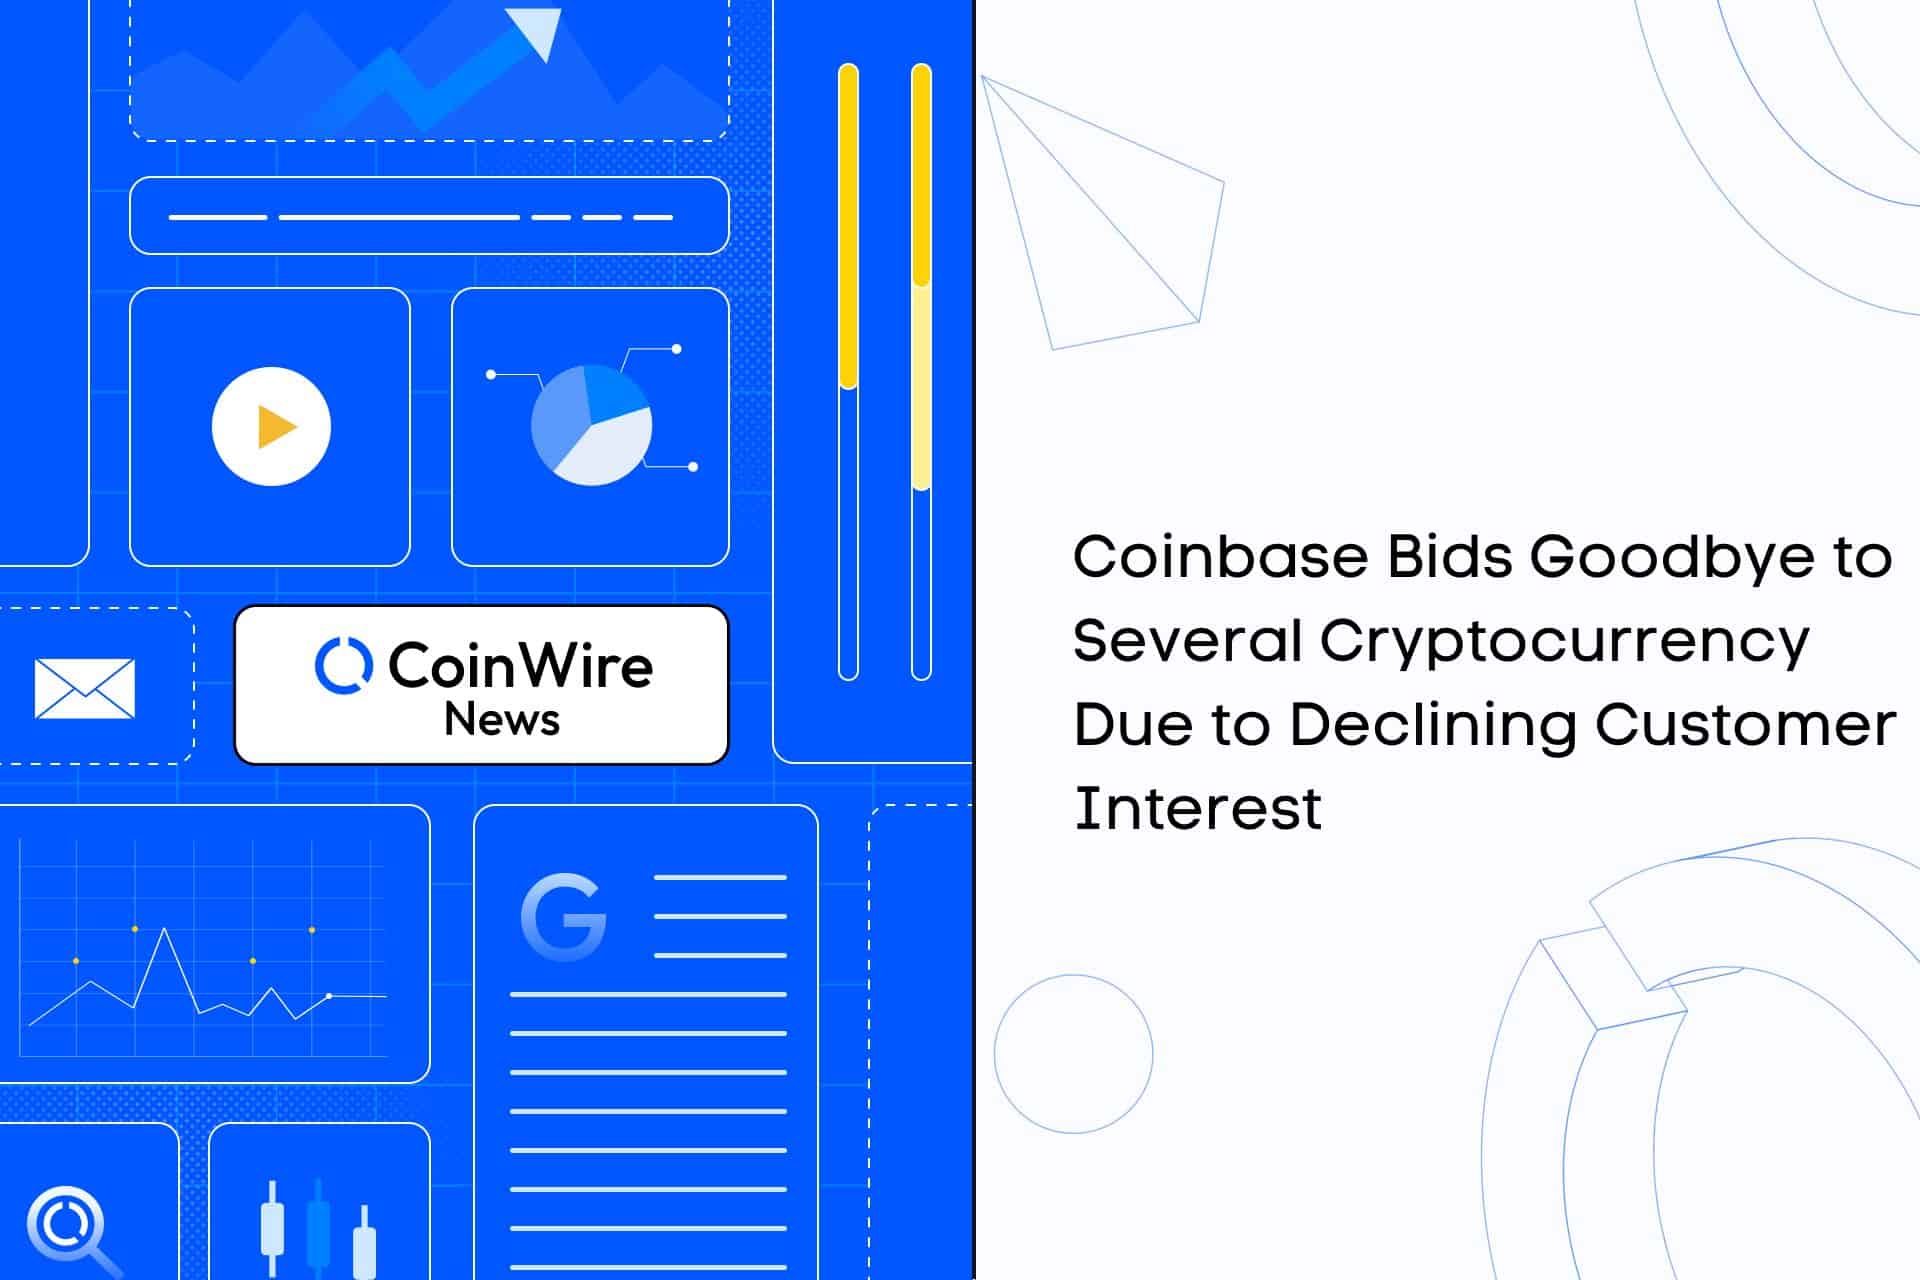 Coinbase Bids Goodbye To  Bitcoin Cash, Ethereum Classic, Ripple, And Stellar Due To Declining Customer Interest